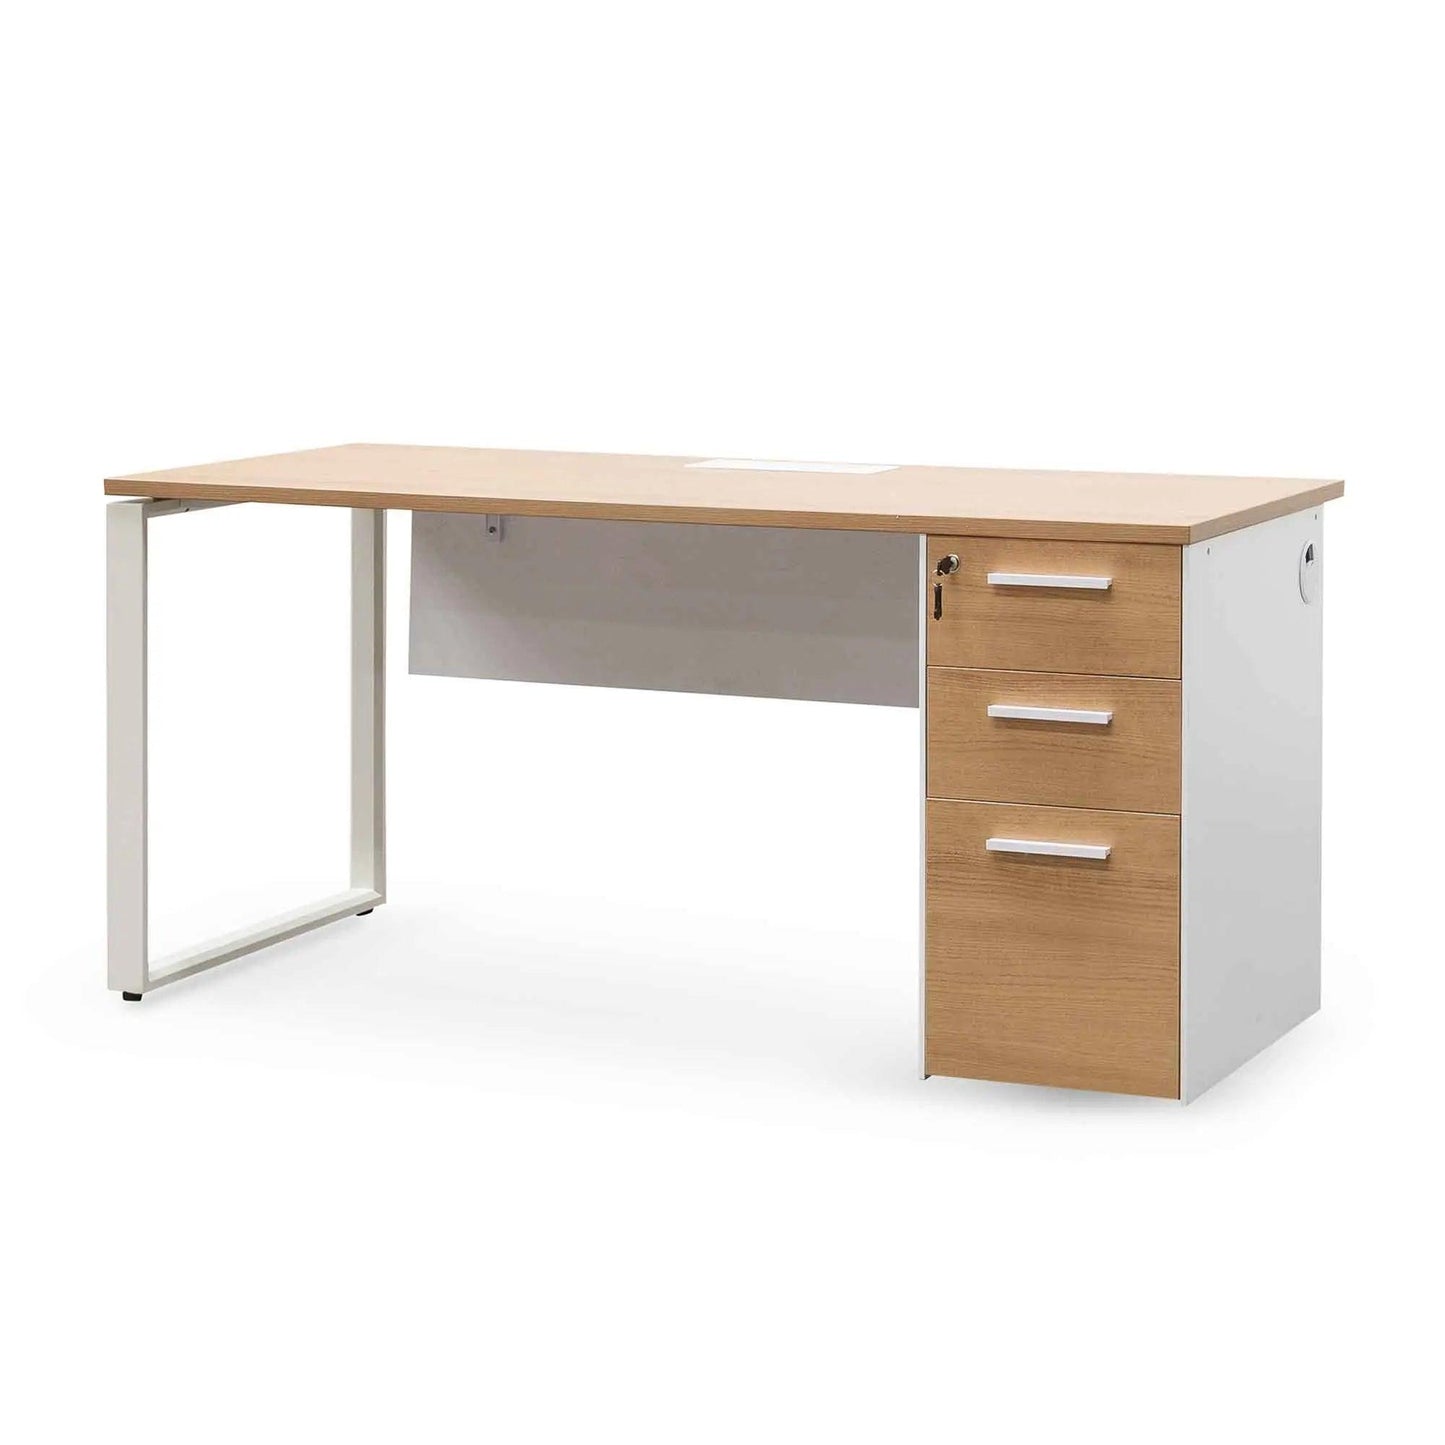 Calibre 1 Seater Office Desk - Natural and White OT6541-SN - Office DesksOT6541-SN 2